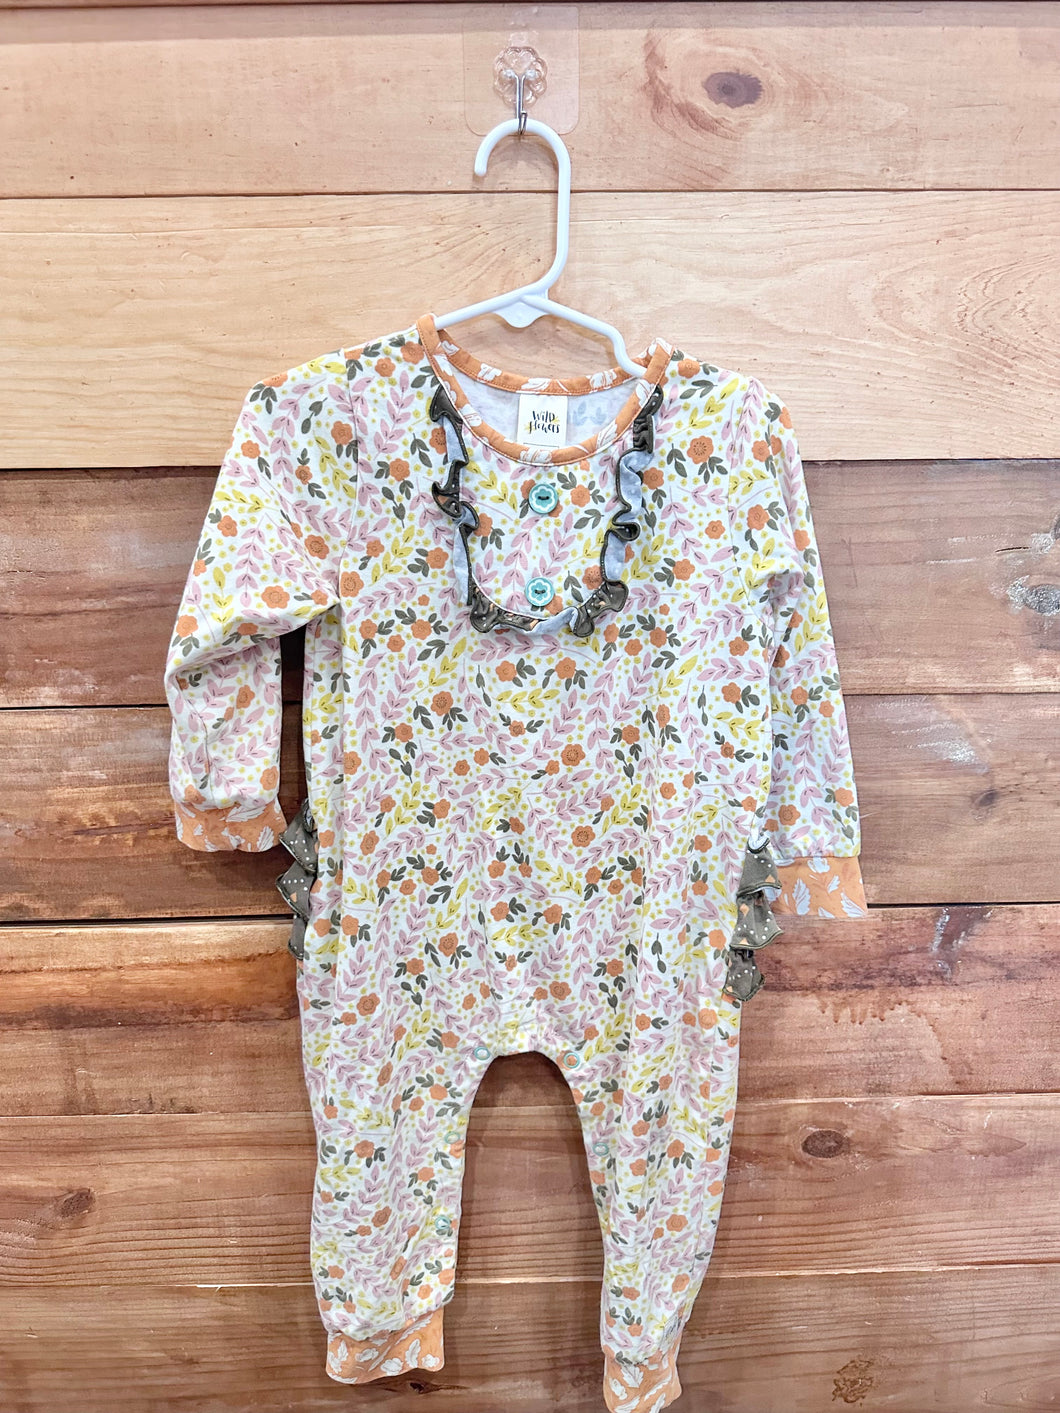 Wildflowers Floral Romper Size 2